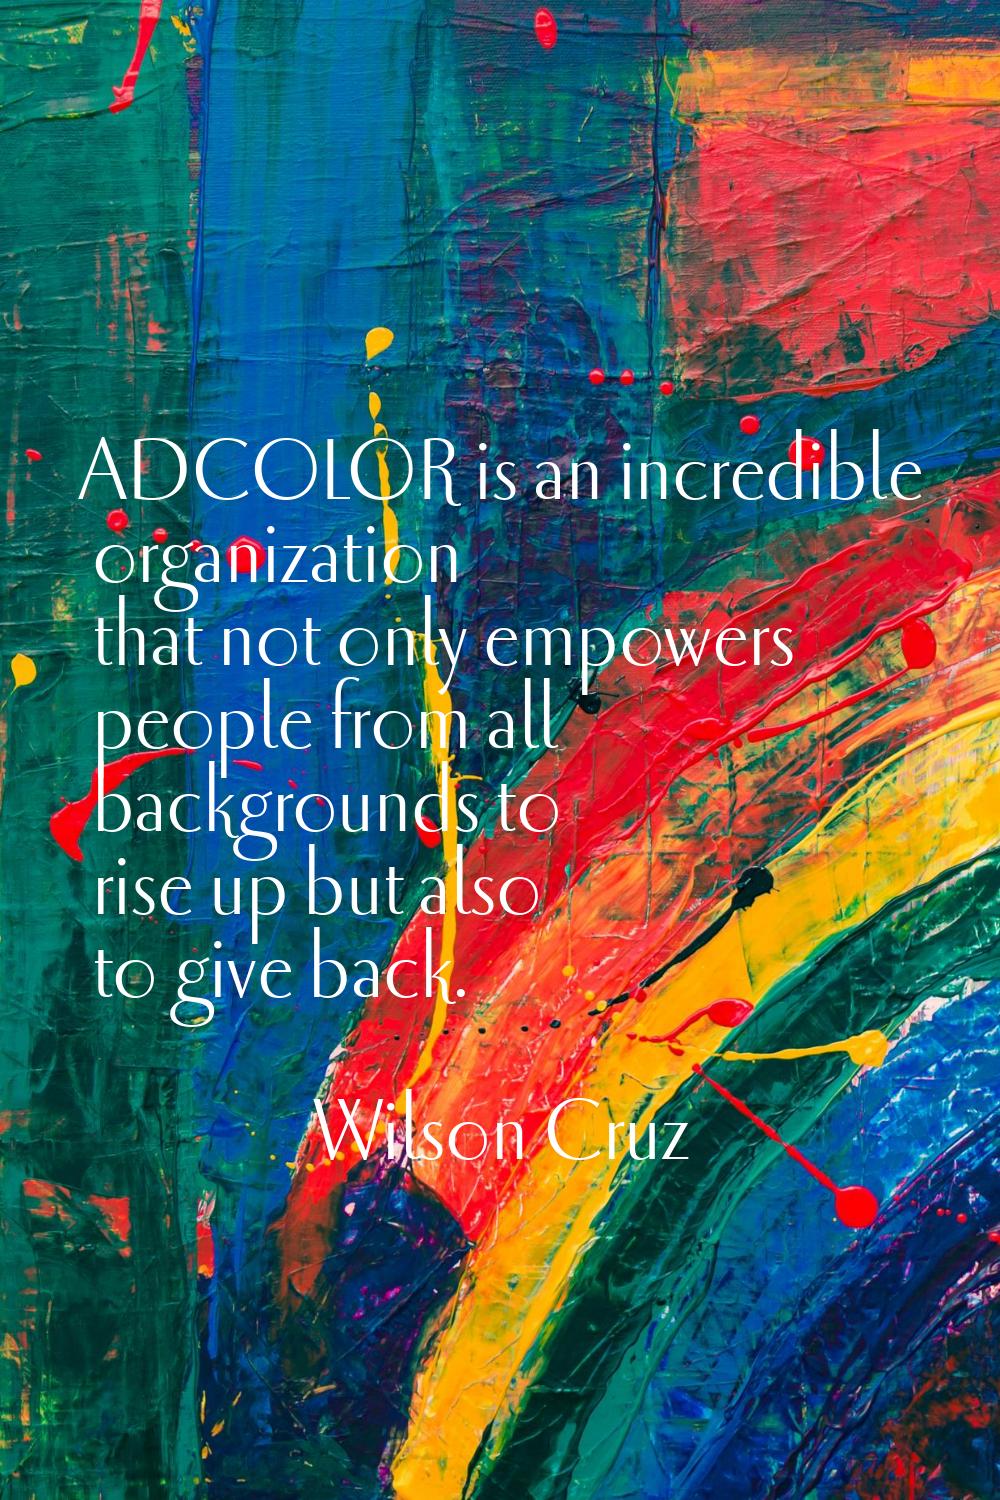 ADCOLOR is an incredible organization that not only empowers people from all backgrounds to rise up